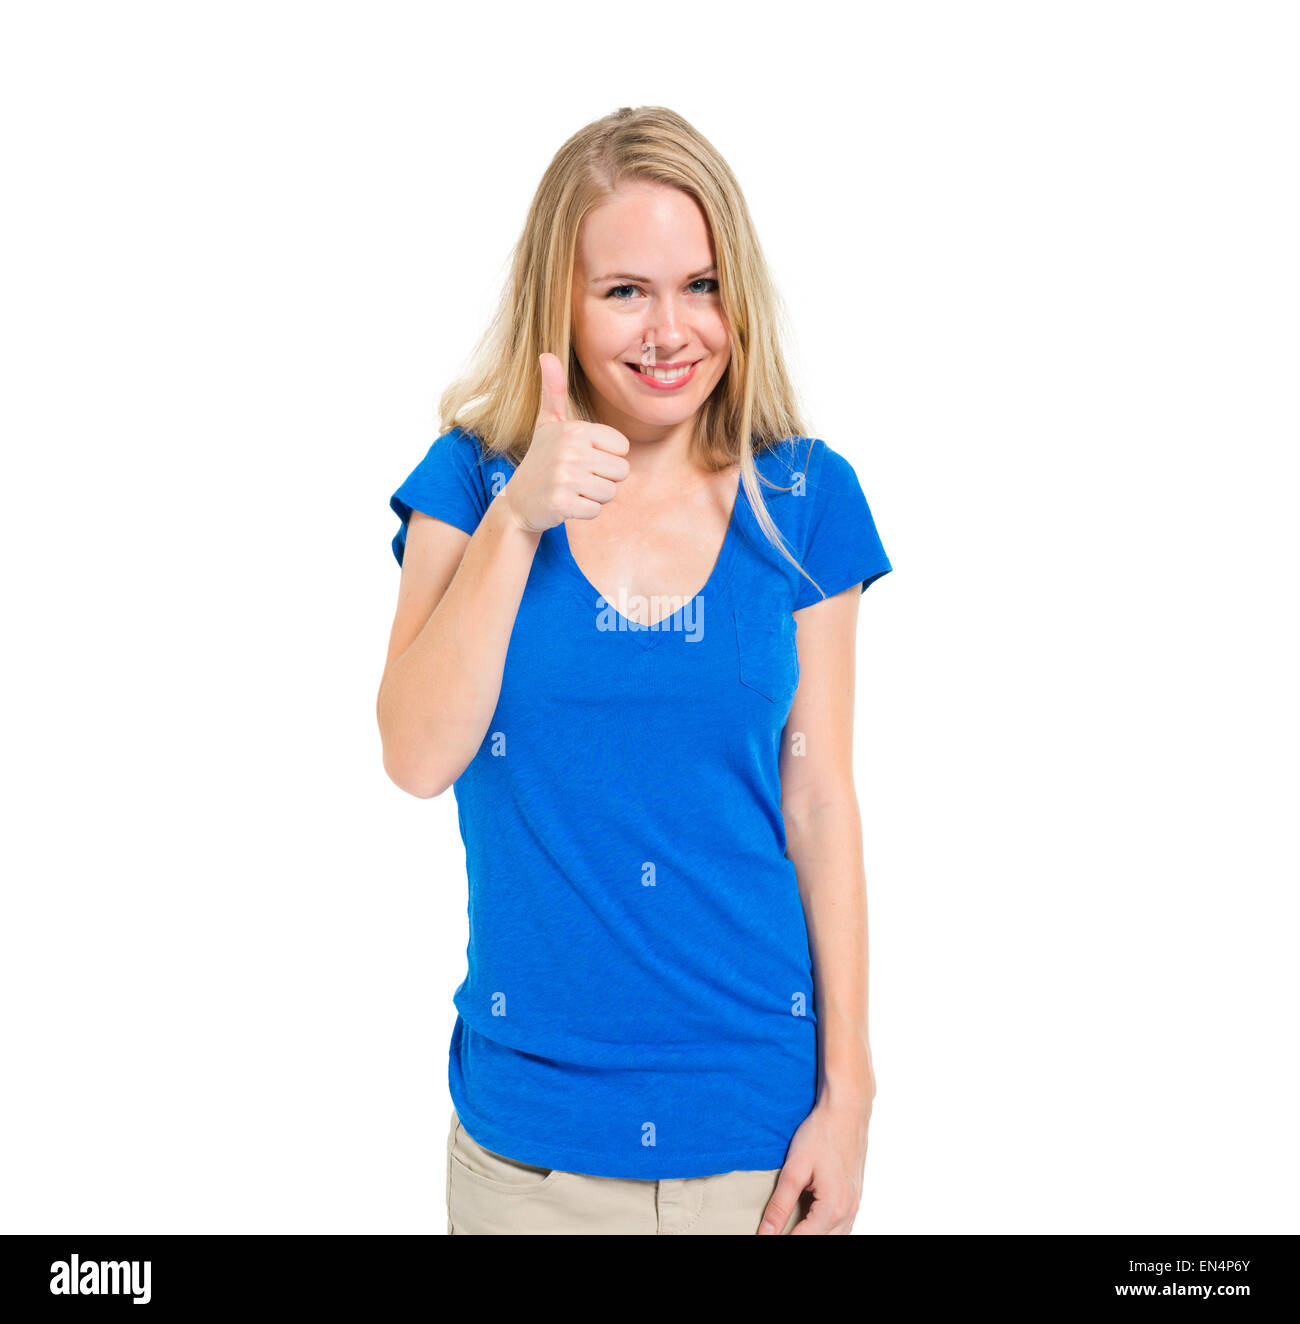 Women Showing Thumbs Up Stock Photo